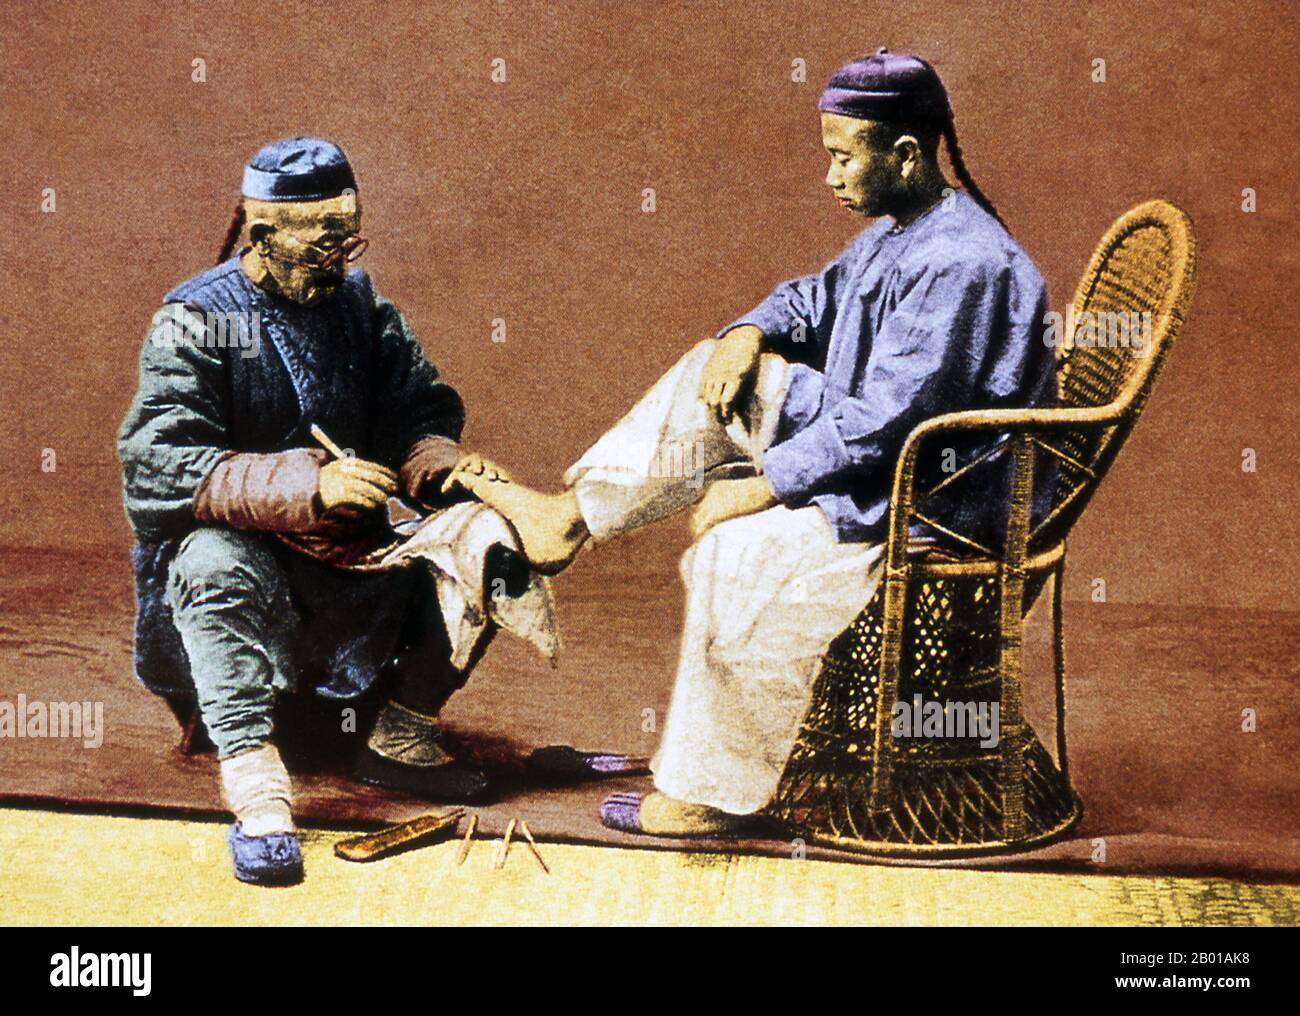 China: Man receiving a pedicure, Beijing, c. 1890.  In old China pedicures - and pedicurists - were often mobile. The Chinese term for pedicure is 'xiu jiao di'. A pedicure is a way to improve the appearance of the feet and their nails. It provides a similar service to a manicure. The word pedicure refers to superficial cosmetic treatment of the feet and toenails and comes from the Latin words pedis, which means 'of the foot', and cura, which means 'care'. Stock Photo